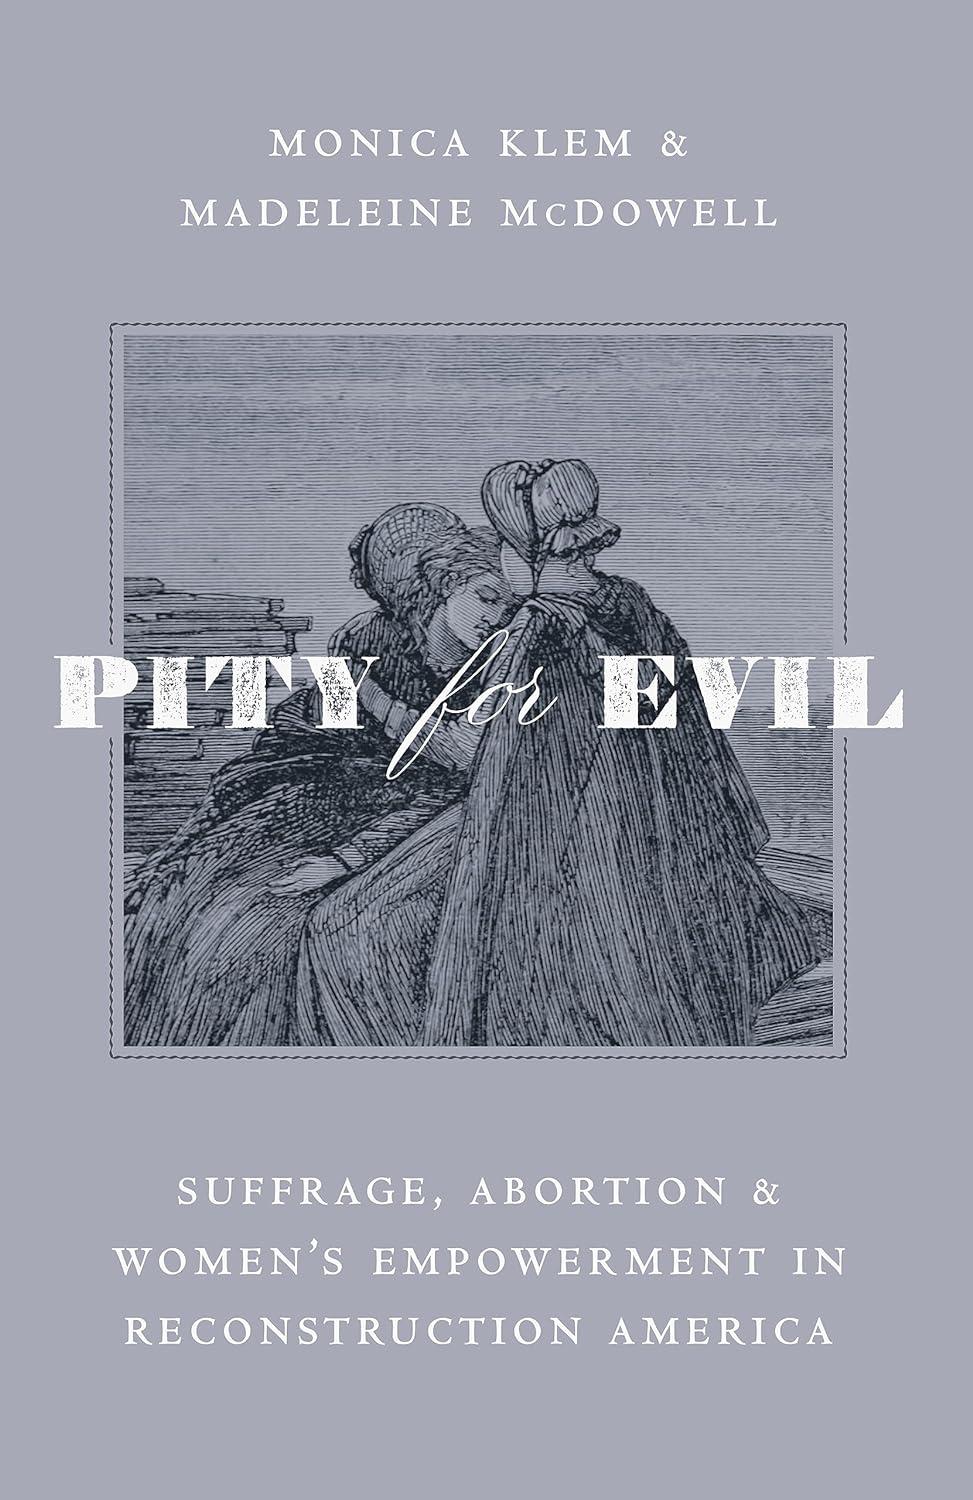 "Pity for Evil: Suffrage, Abortion, and Women's Empowerment in Reconstruction America," by Monica Klem and Madeleine McDowell